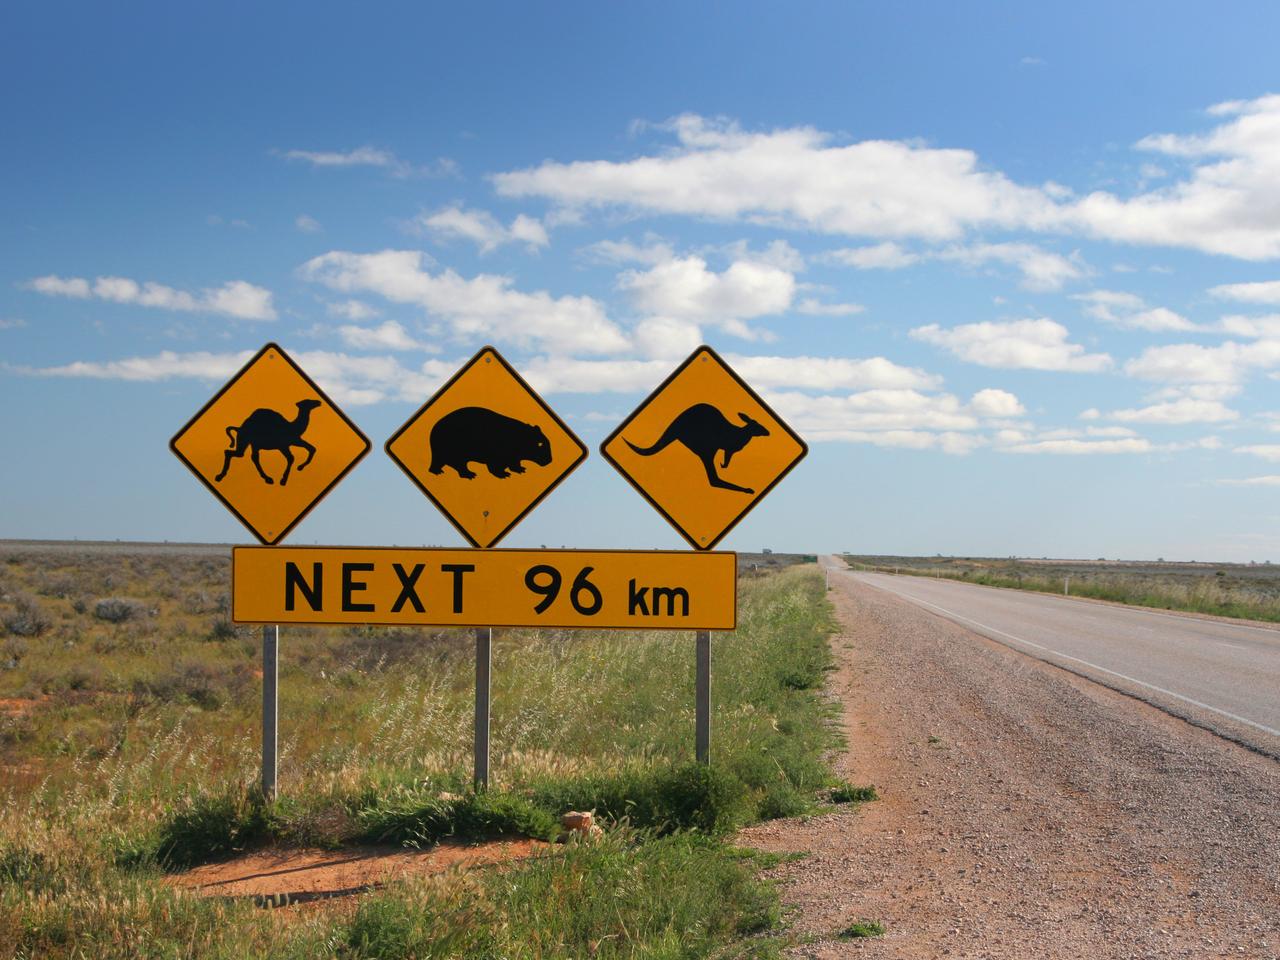 "Warning sings for a camel, kangaroo and a wombat in the Australian Outback"